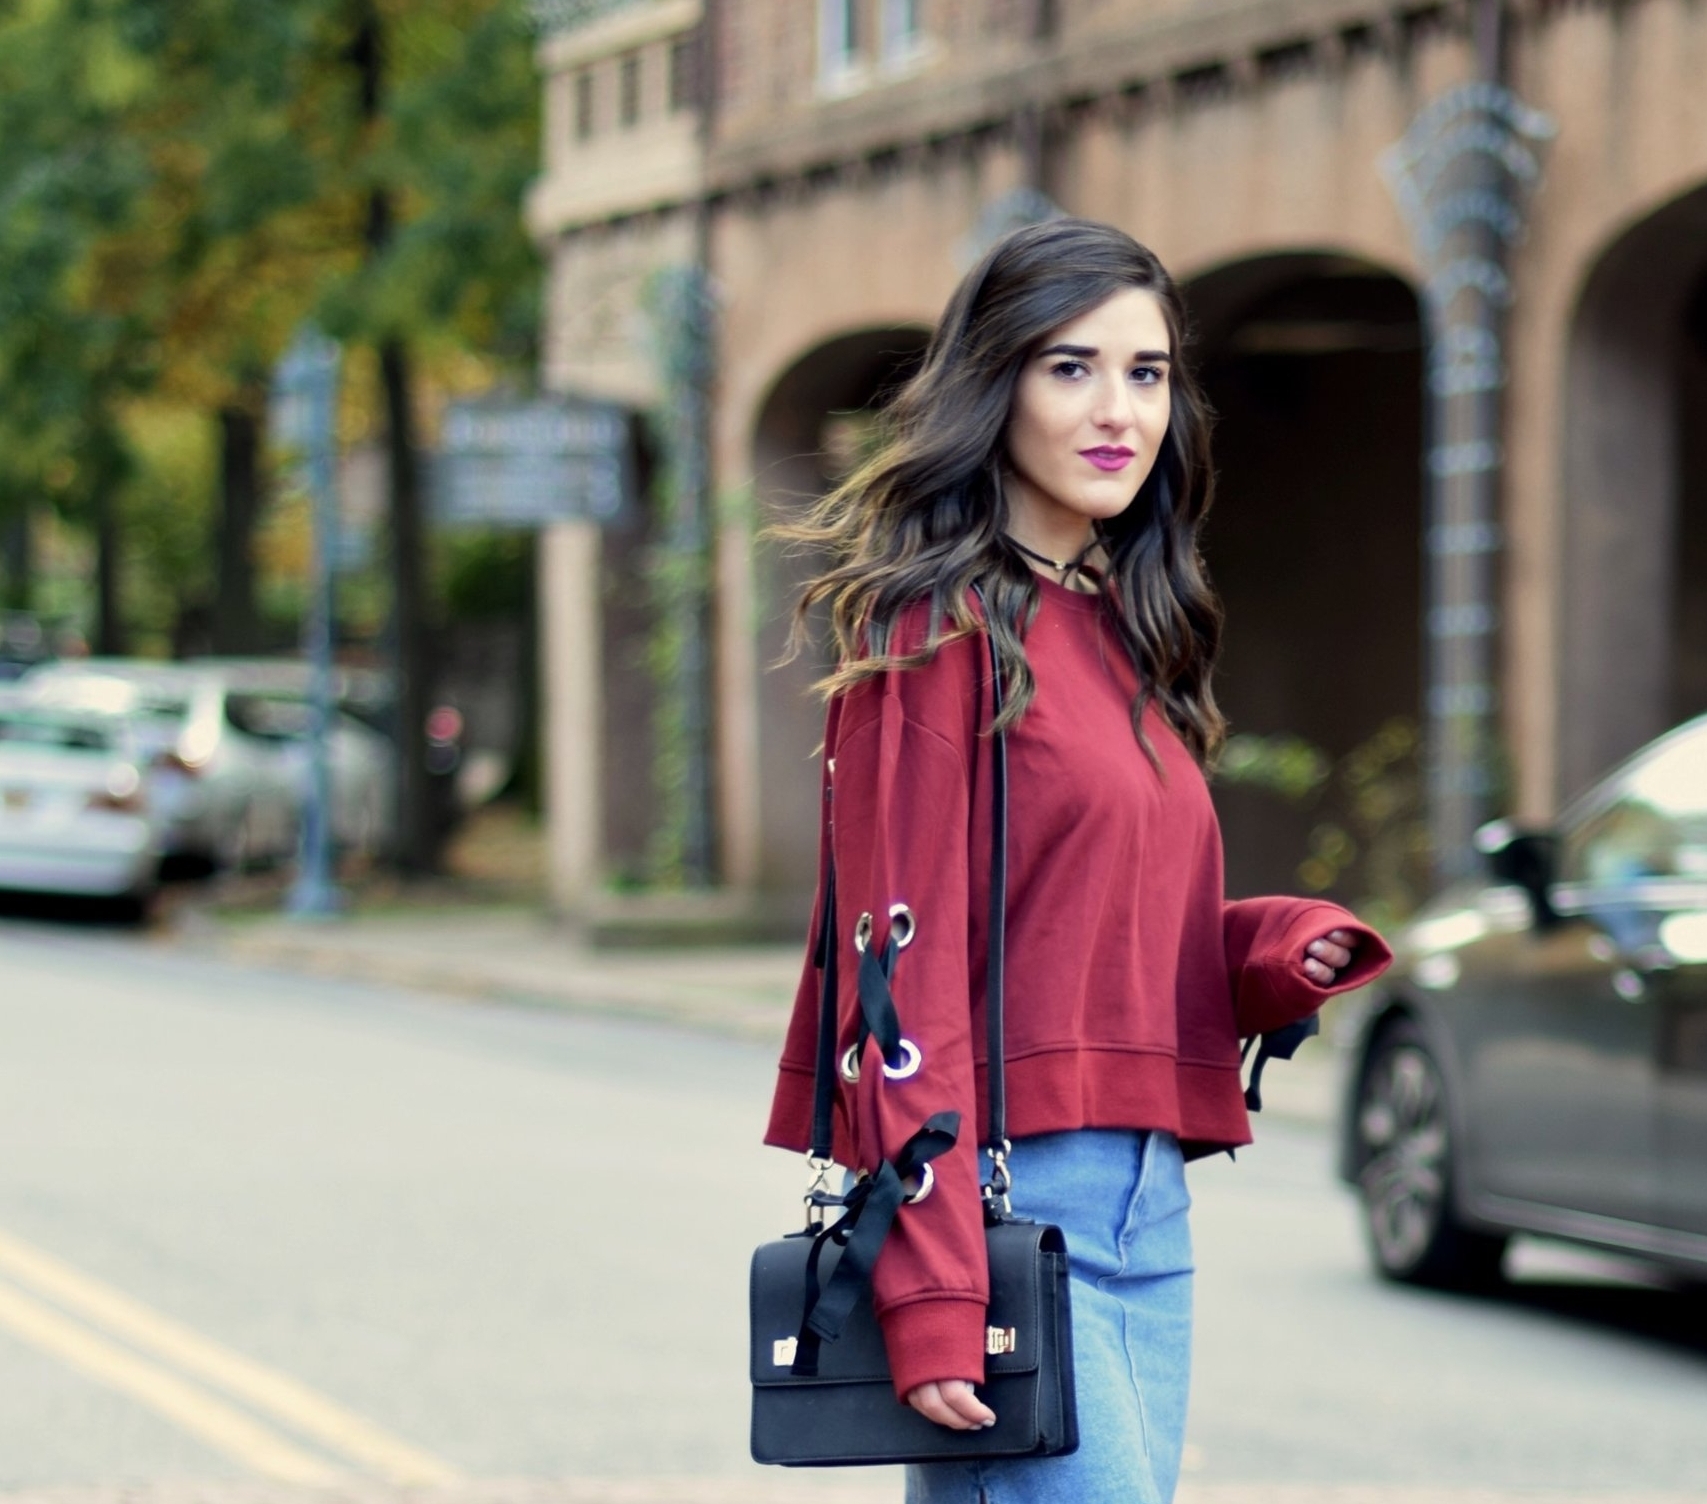 Red Lace-Up Sleeve Sweatshirt Denim Skirt 10 Things I'm Thankful For This Year Esther Santer Fashion Blog NYC Street Style Blogger Outfit OOTD Trendy Girl Women Choker Black Booties Hair Brunette Henri Bendel West 57th Schoolbag Winter Look Fall Shop.jpg